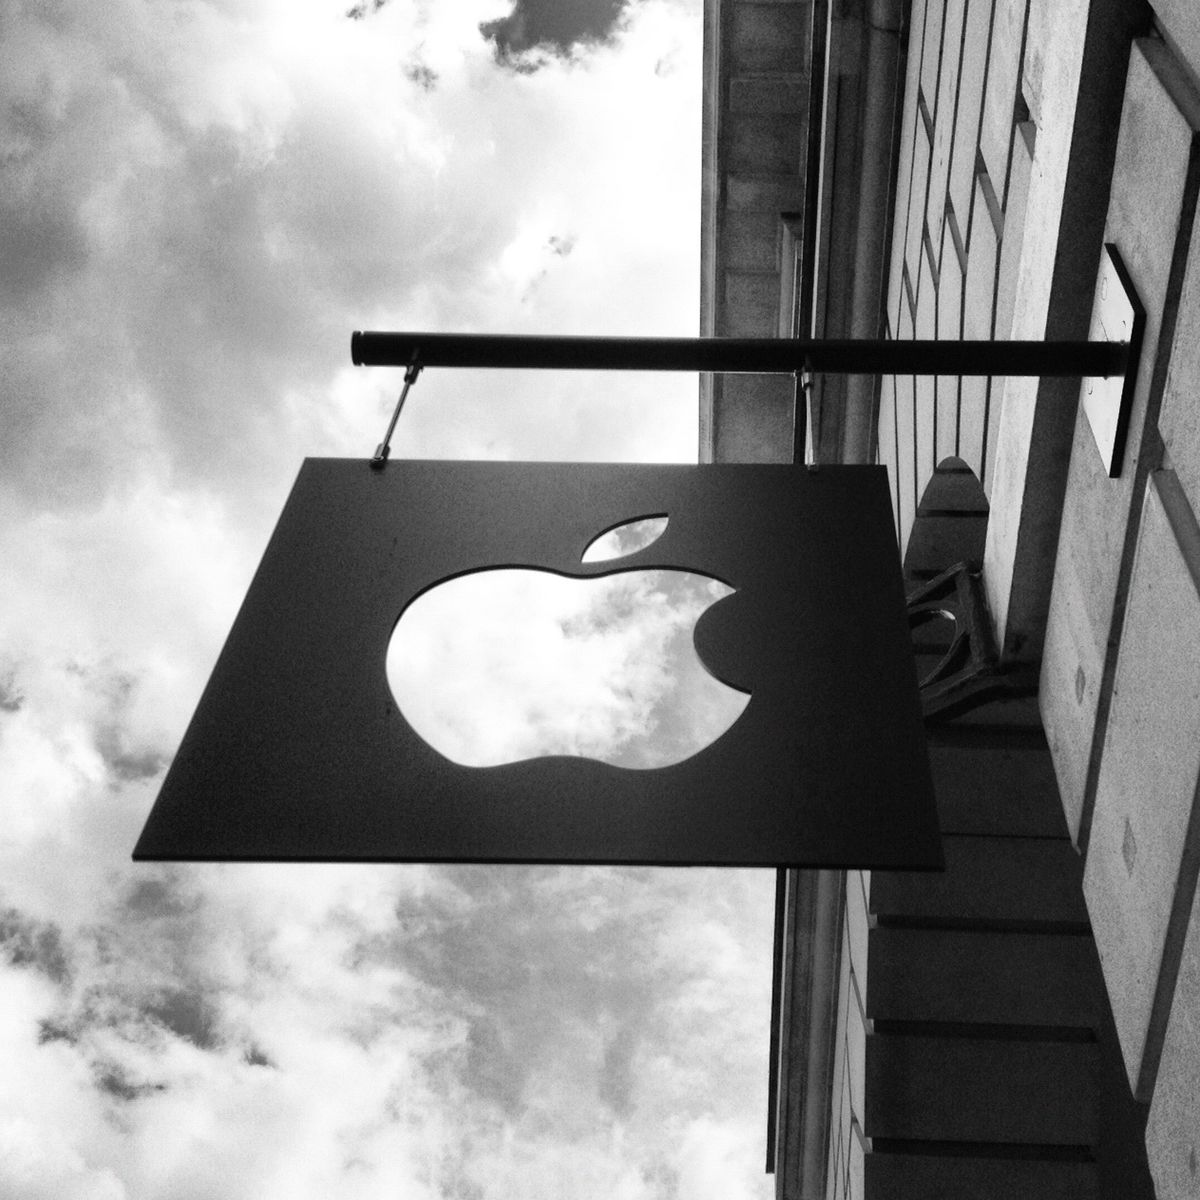 File:Apple Store sign in Covent Garden (7679988780).jpg - Wikimedia Commons